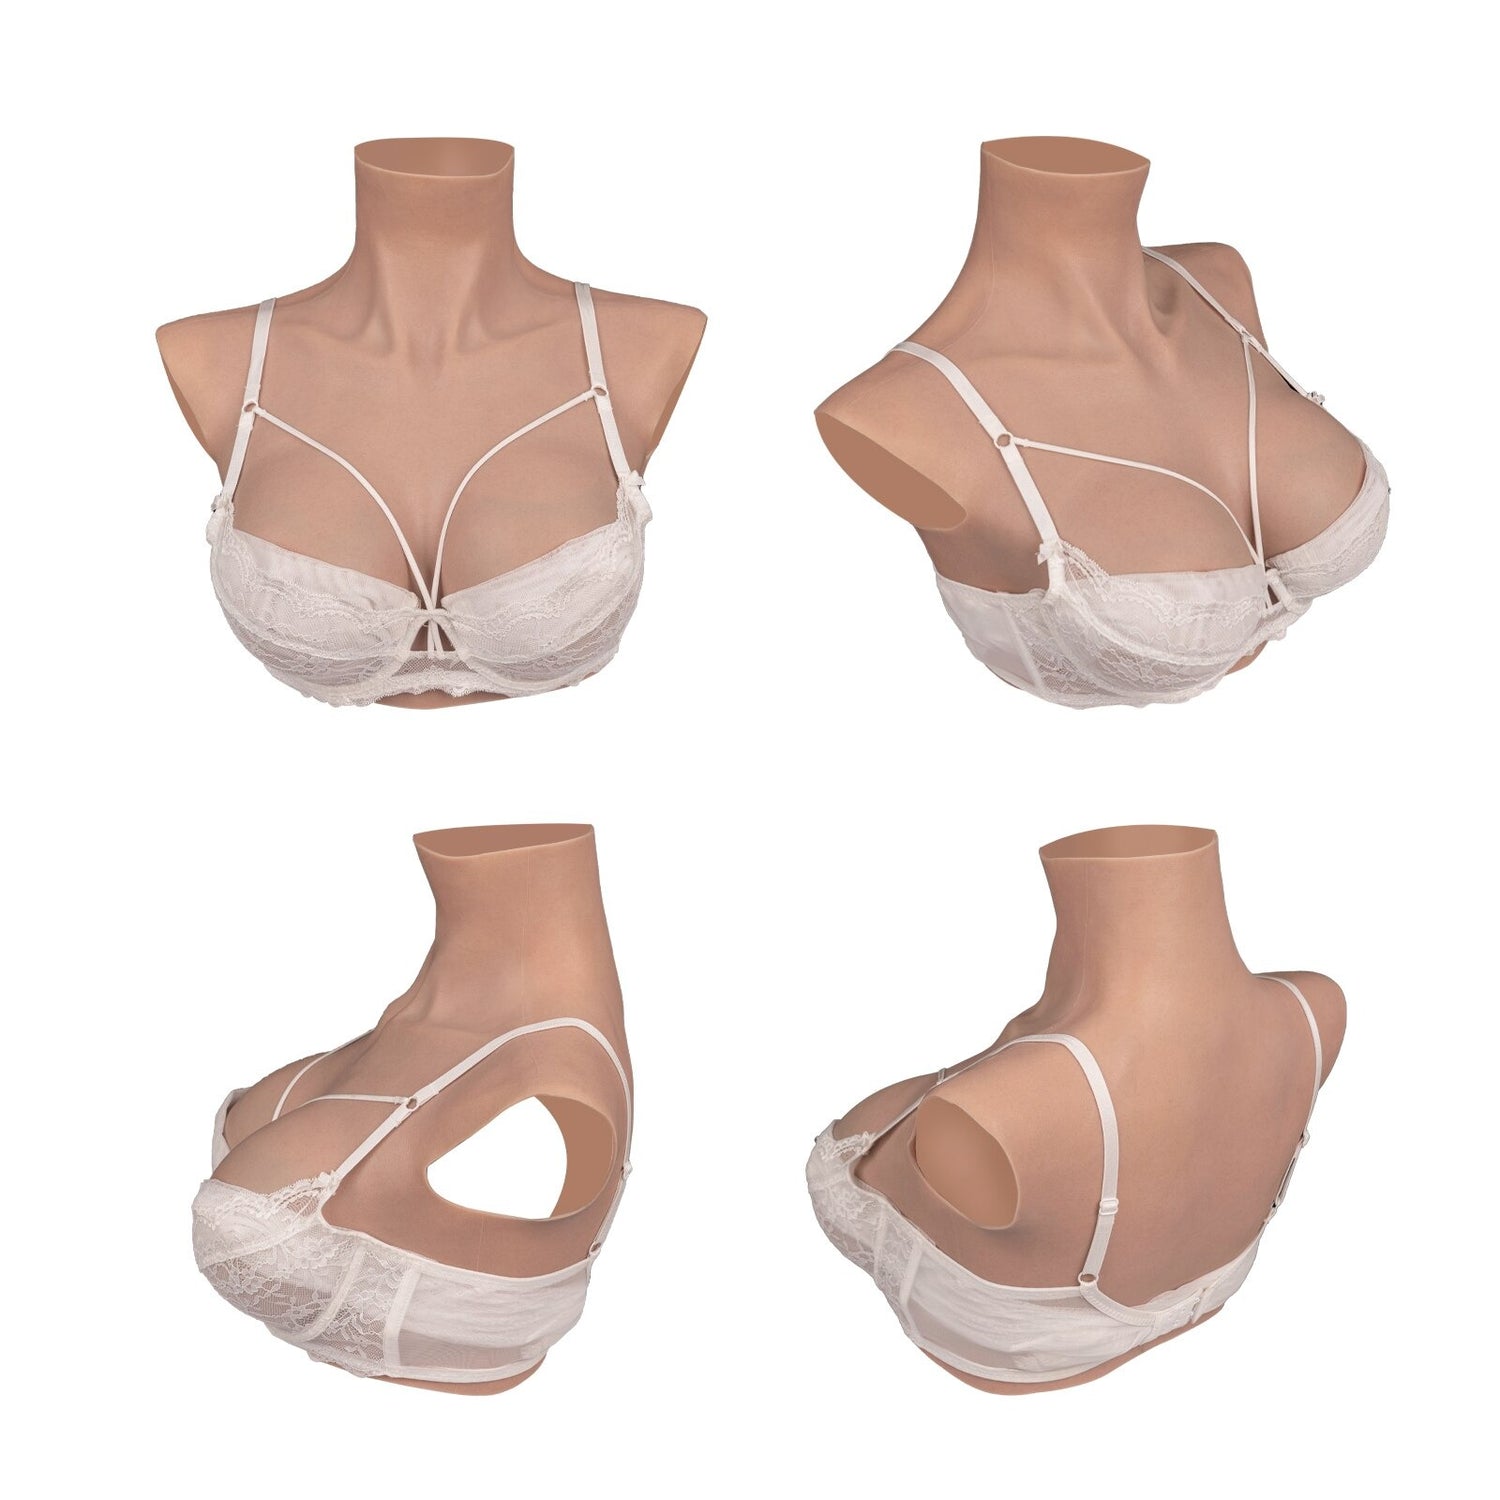 Amie Thyst Silicone Breast Forms – The Drag Queen Store